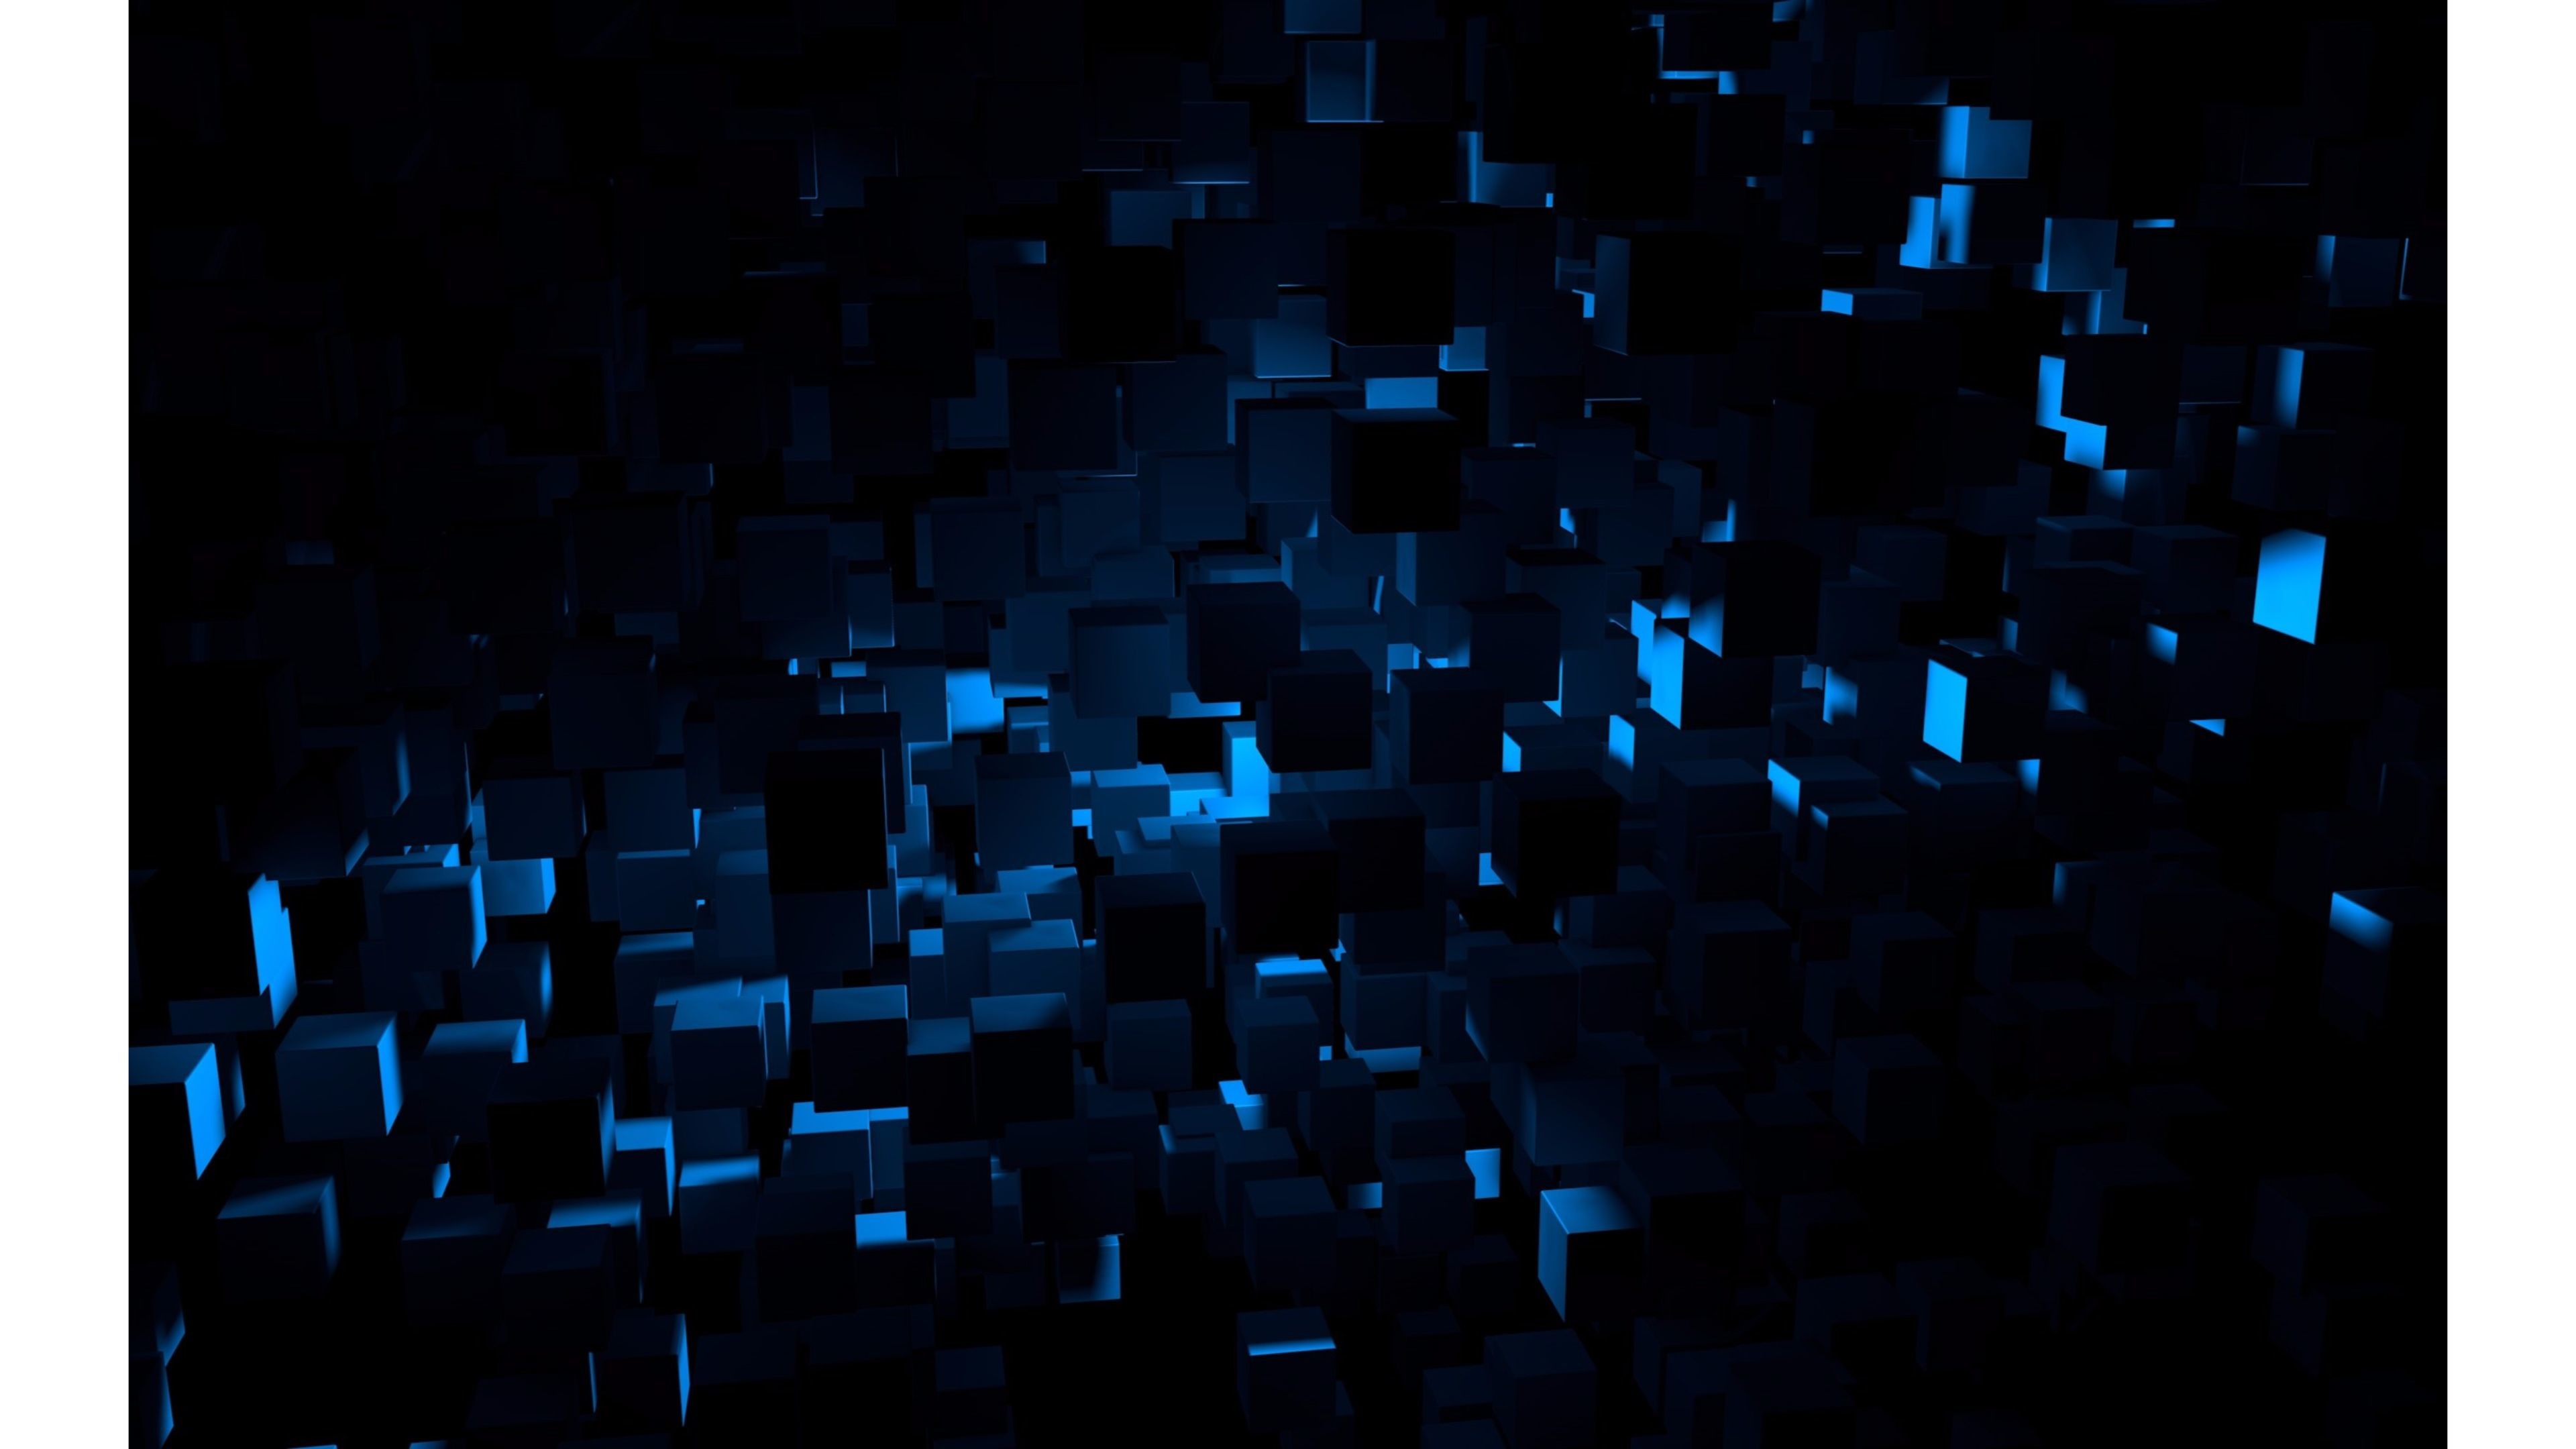 Wallpapers 4k Abstract Wallpaper Blue And Black 4k - 4k Wallpaper Abstract Black - HD Wallpaper 